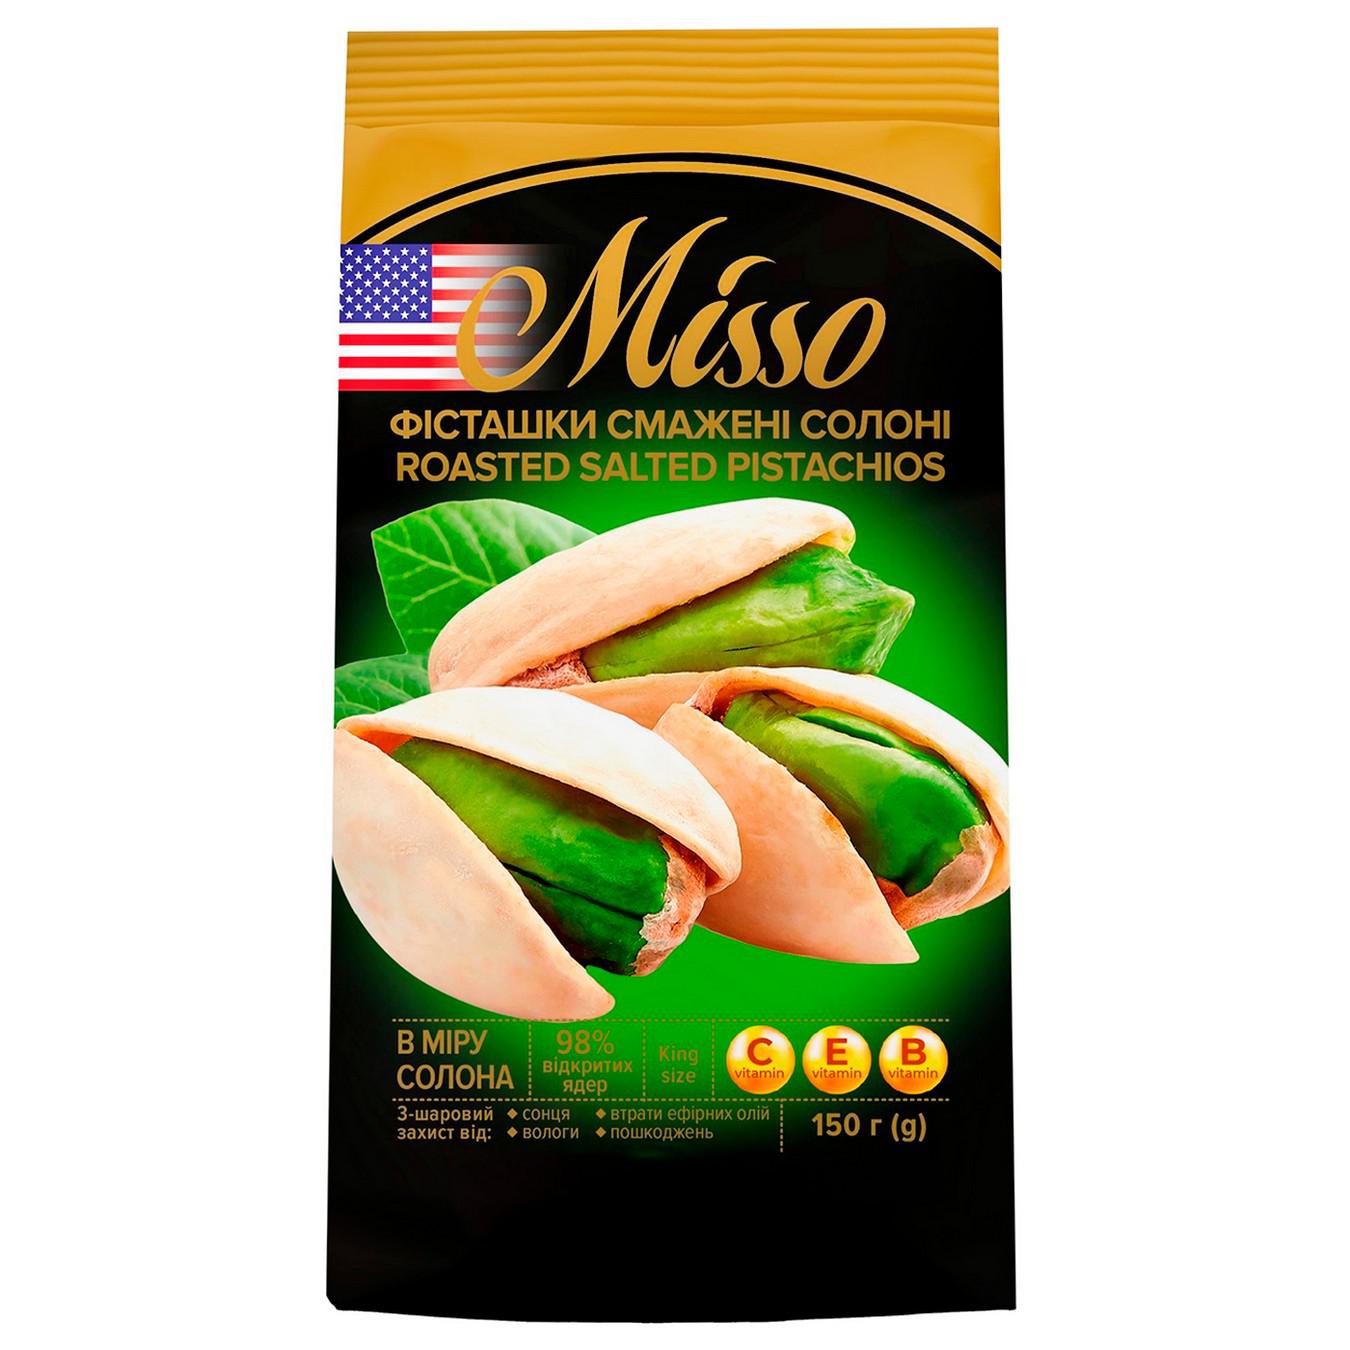 Misso Roasted Salty Pistachio 150g